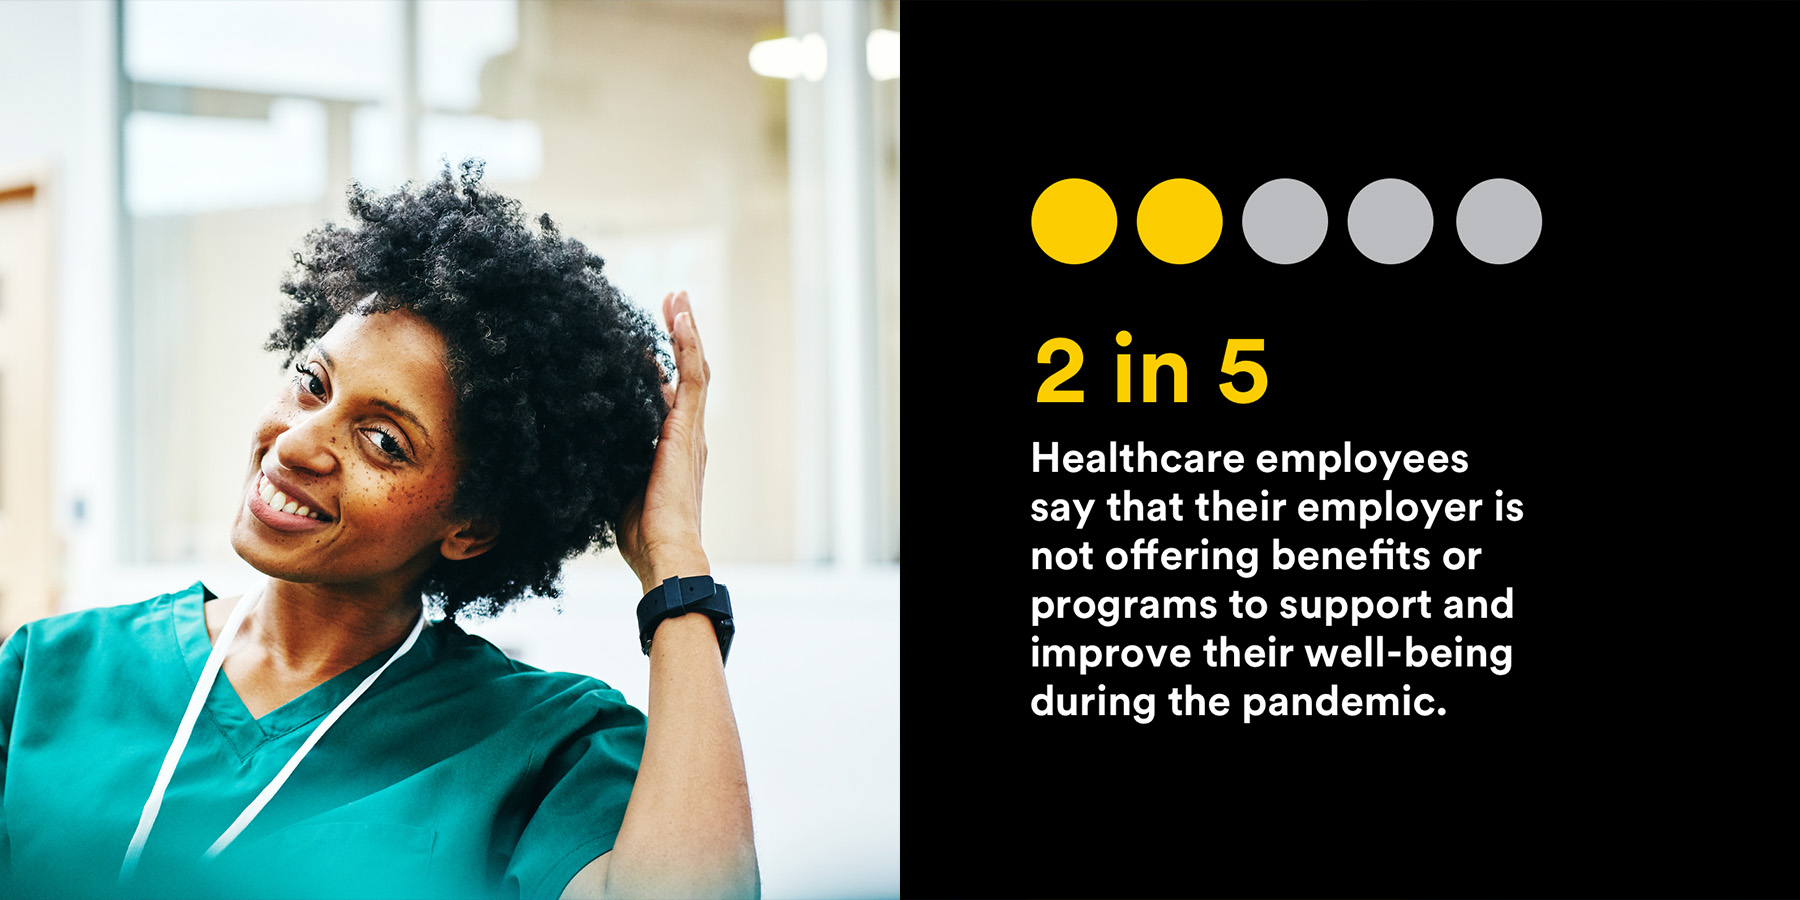 (EBTS Healthcare Infographic) 2 in 5 healthcare employees say that their employer is not offering benefits or programs to support and improve their well-being during the pandemic.